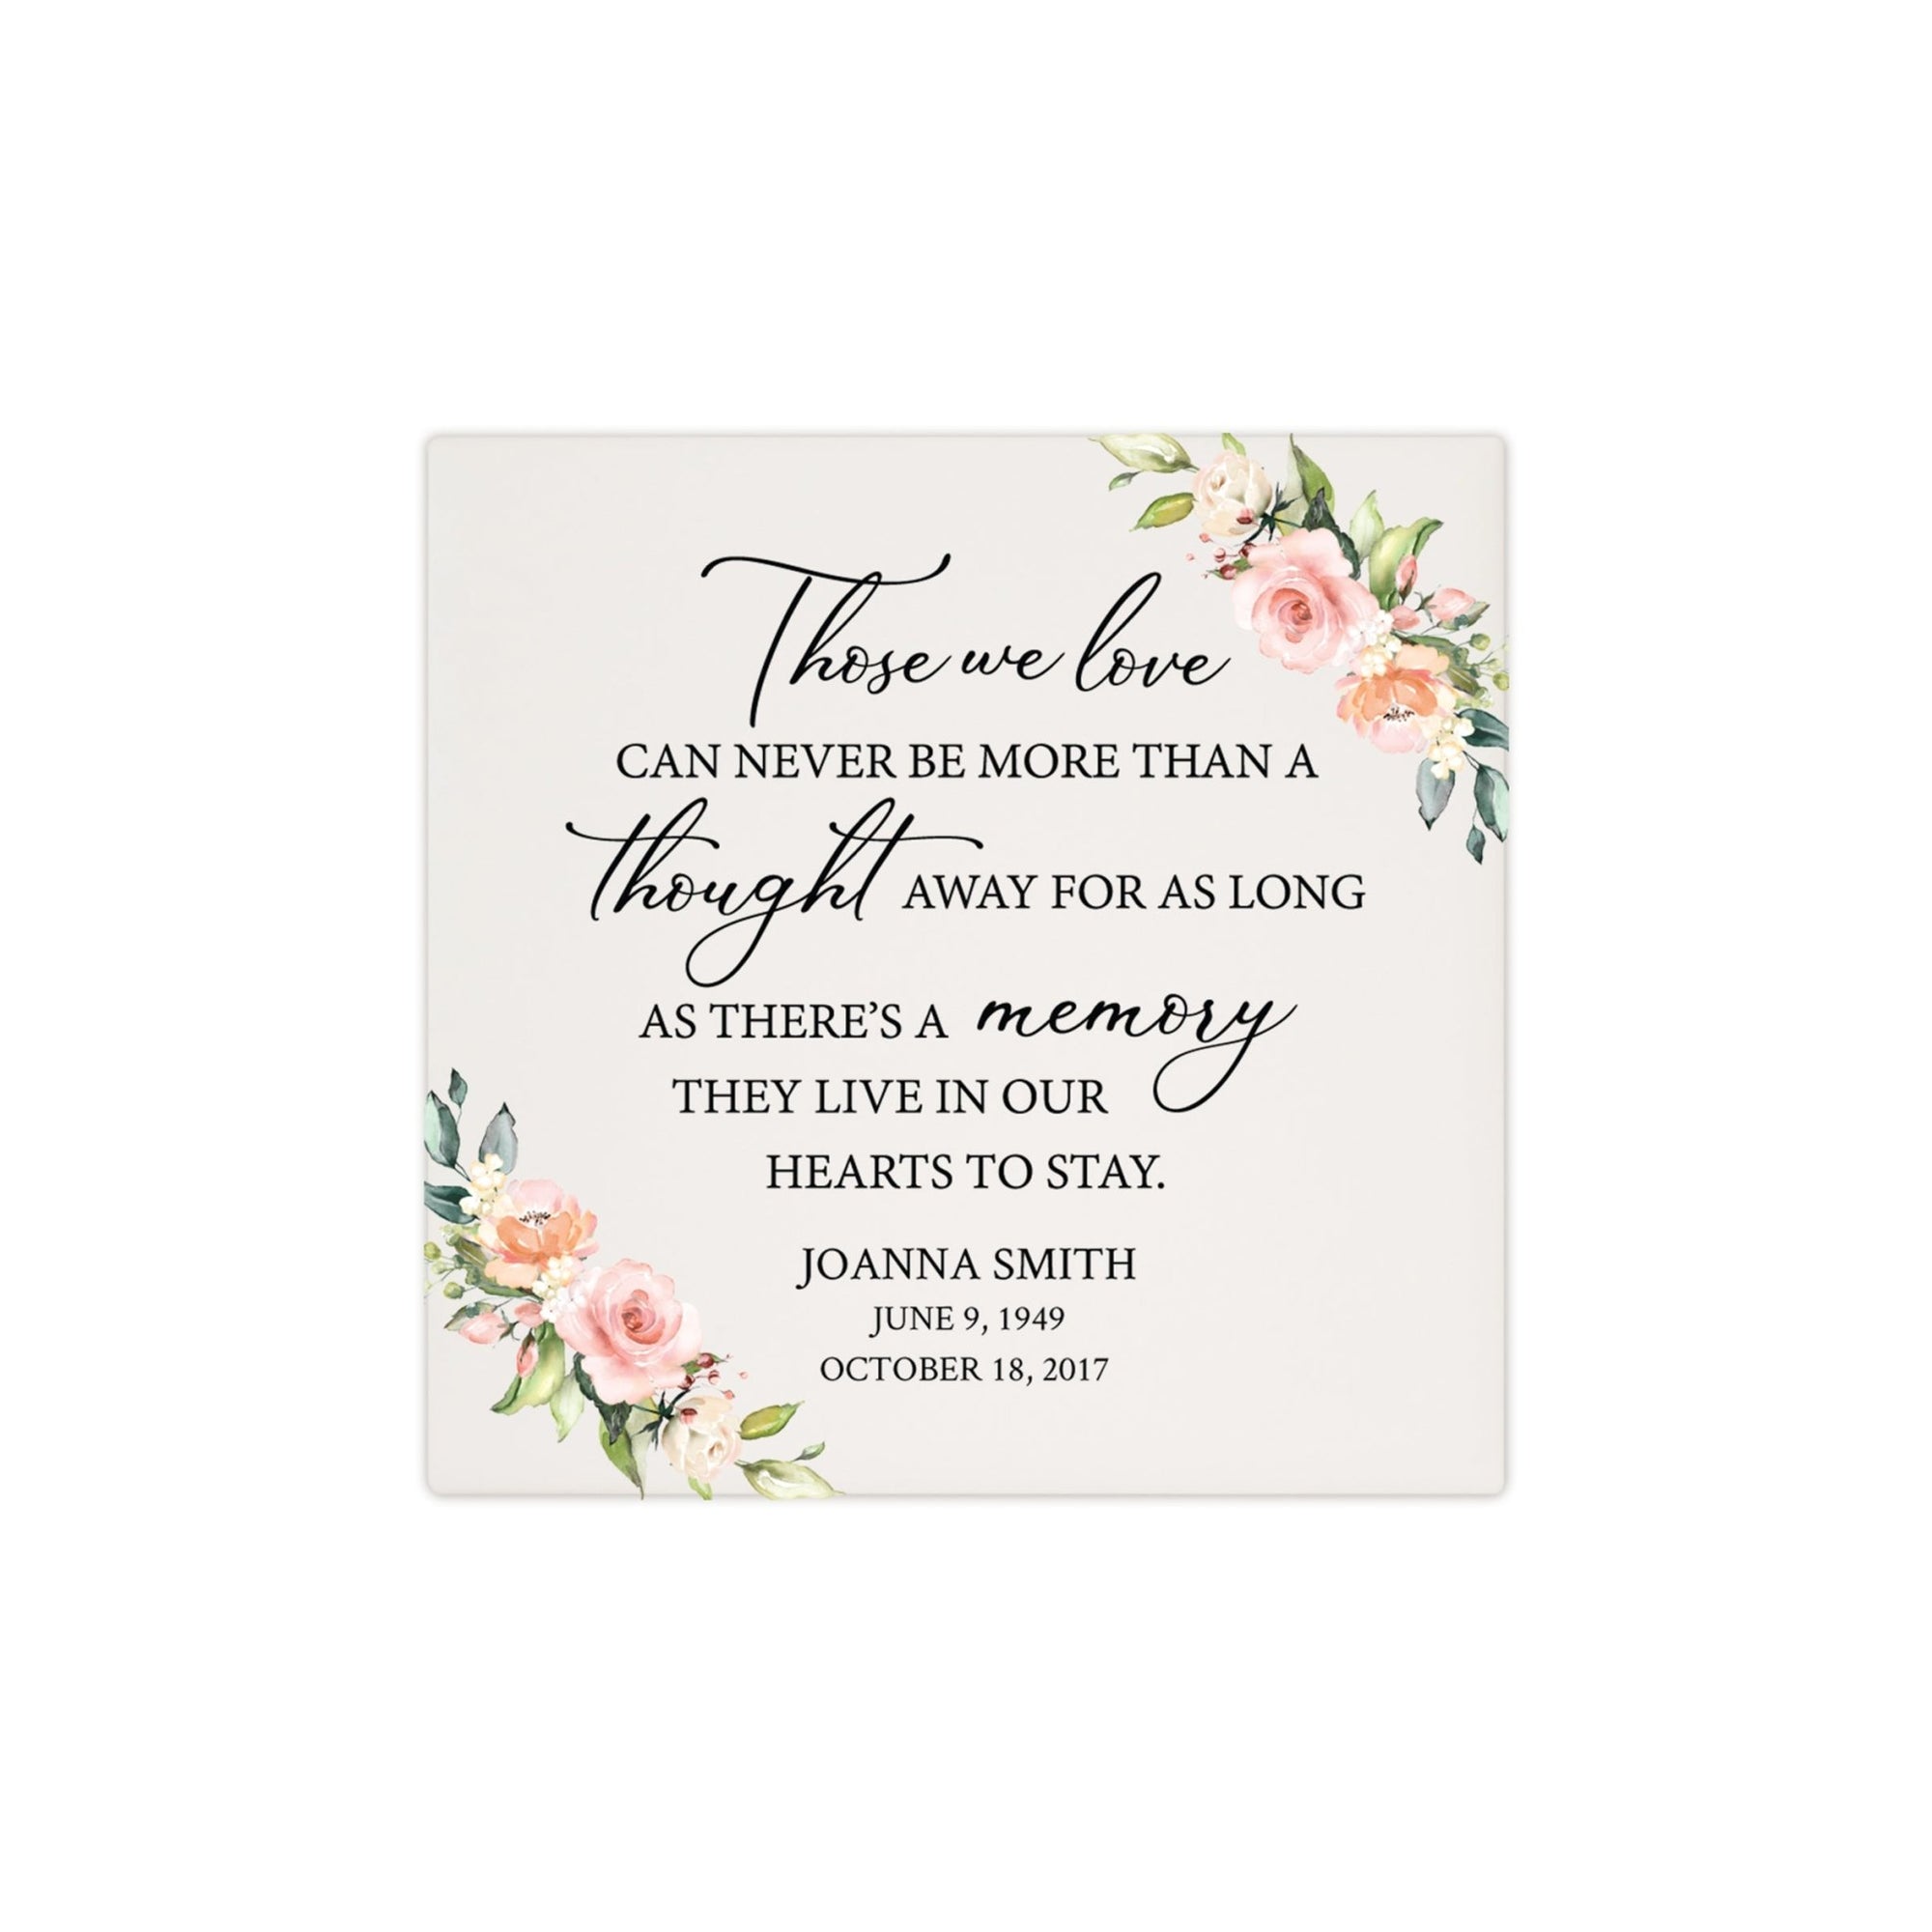 Personalized Memorial Ceramic Trivet for Home Decor - Those We Love Can Never - LifeSong Milestones